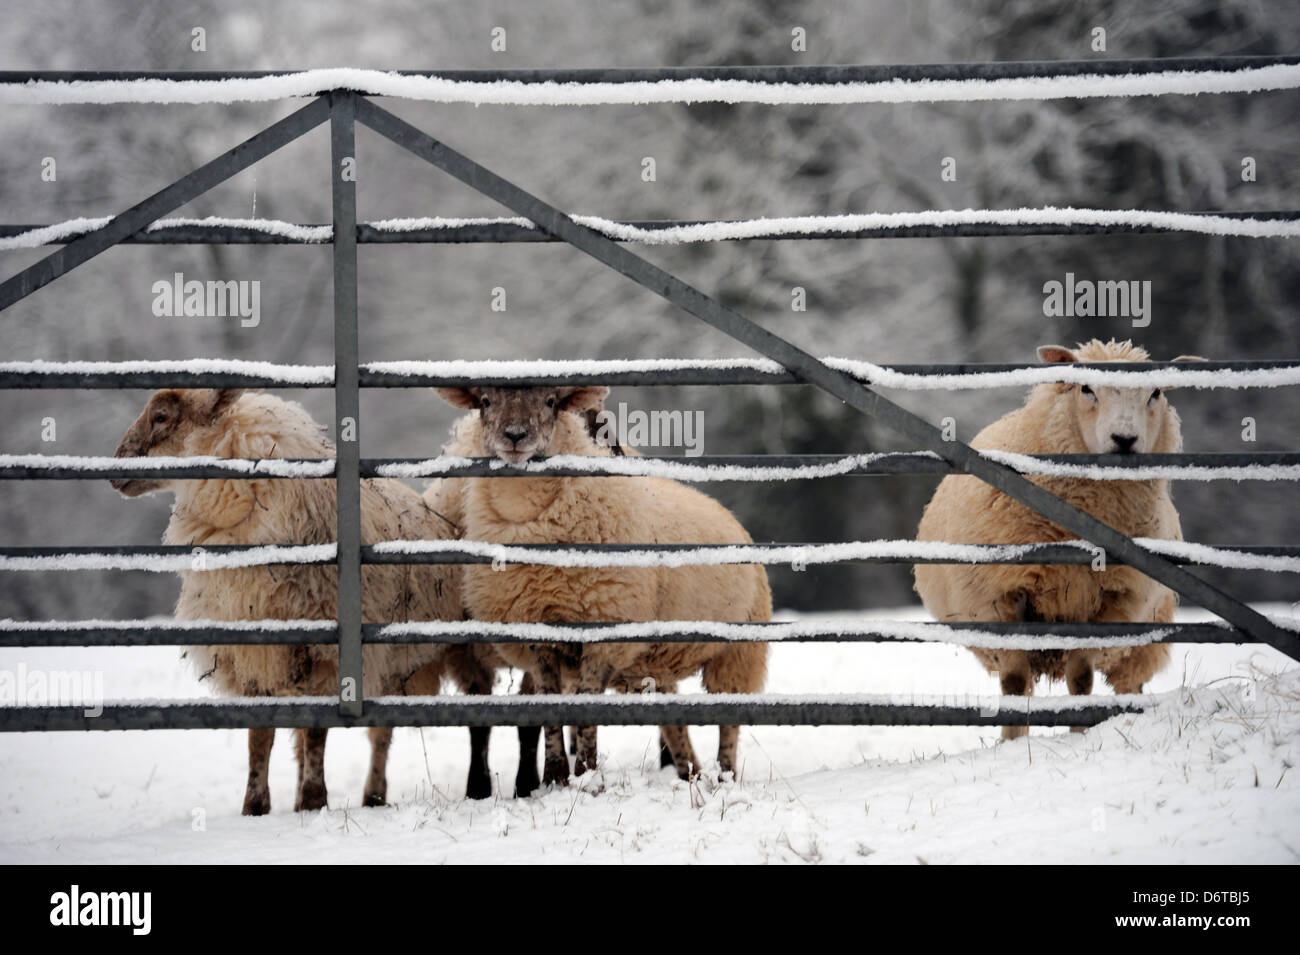 Sheep sheltering by a metal gate in snowy weather Gloucestershire UK Stock Photo